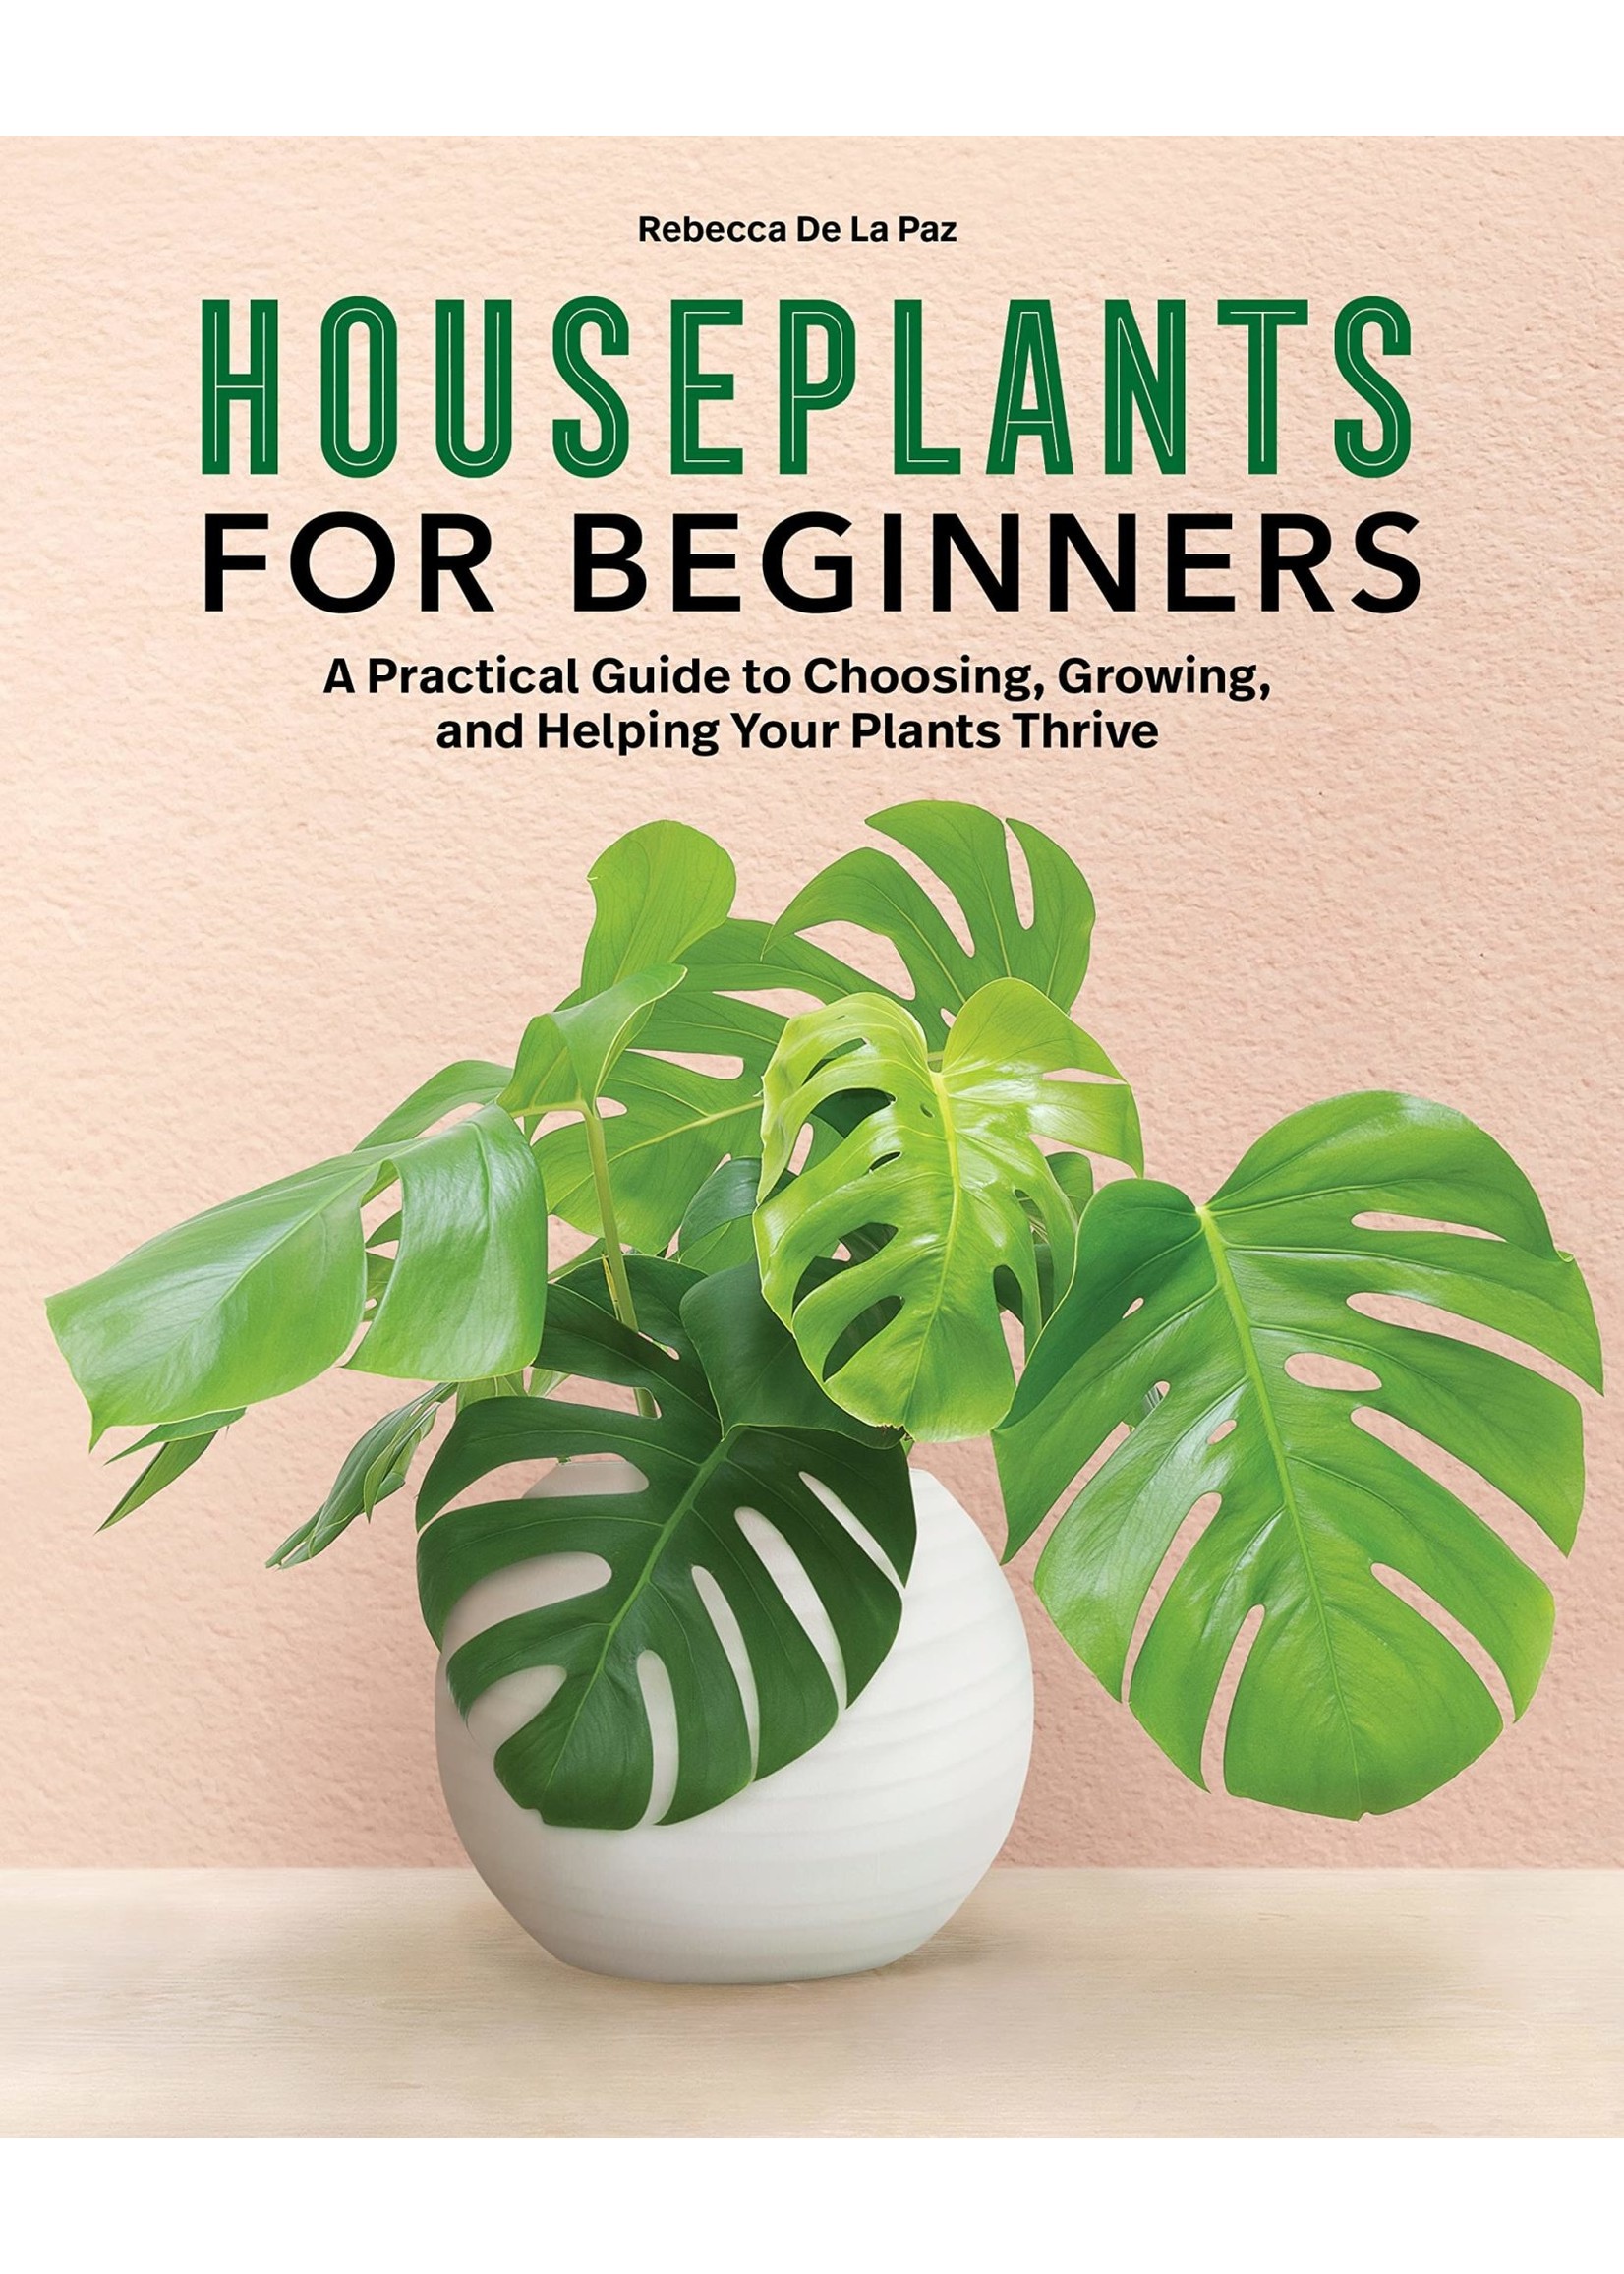 Houseplant for Beginners - A Practical Guide to Choosing, Growing, and Helping Your Plants Thrive